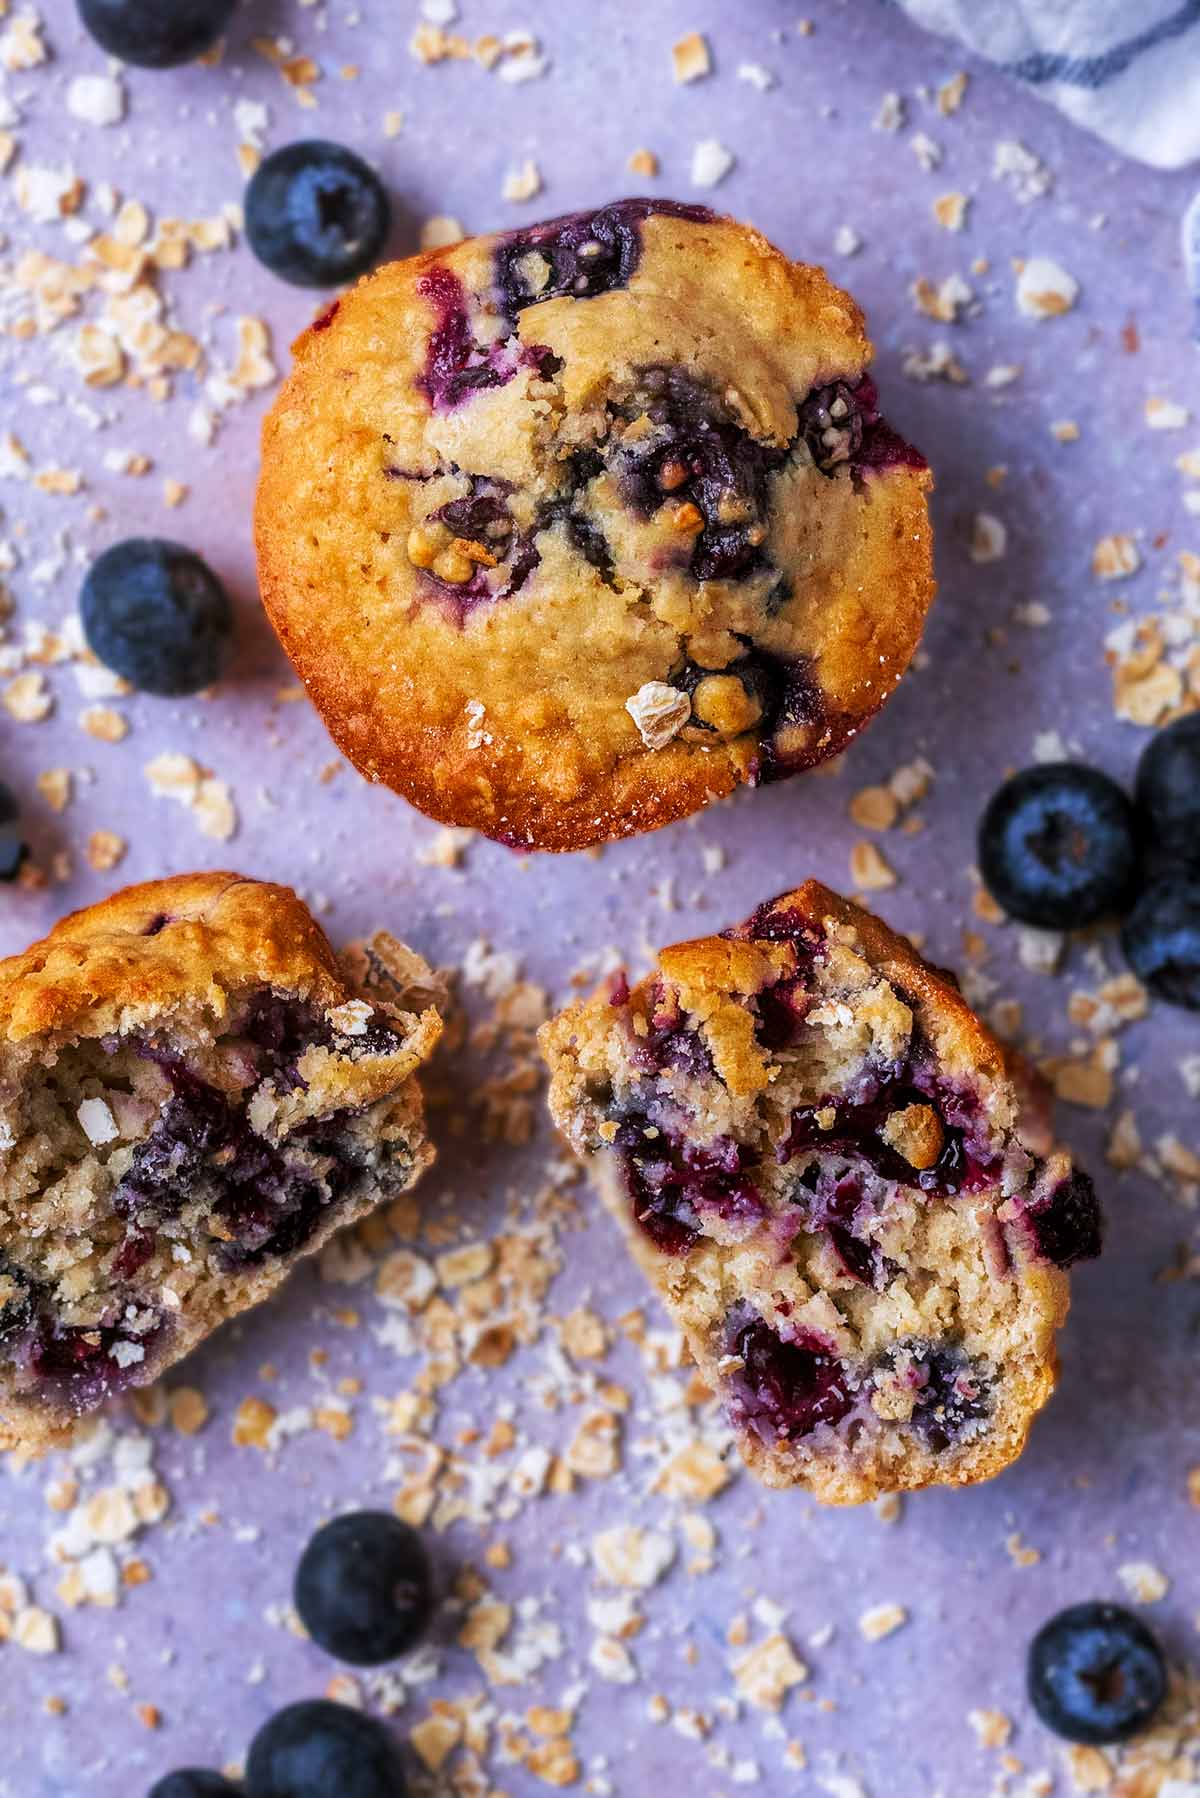 Two blueberry muffins, one is broken in half.